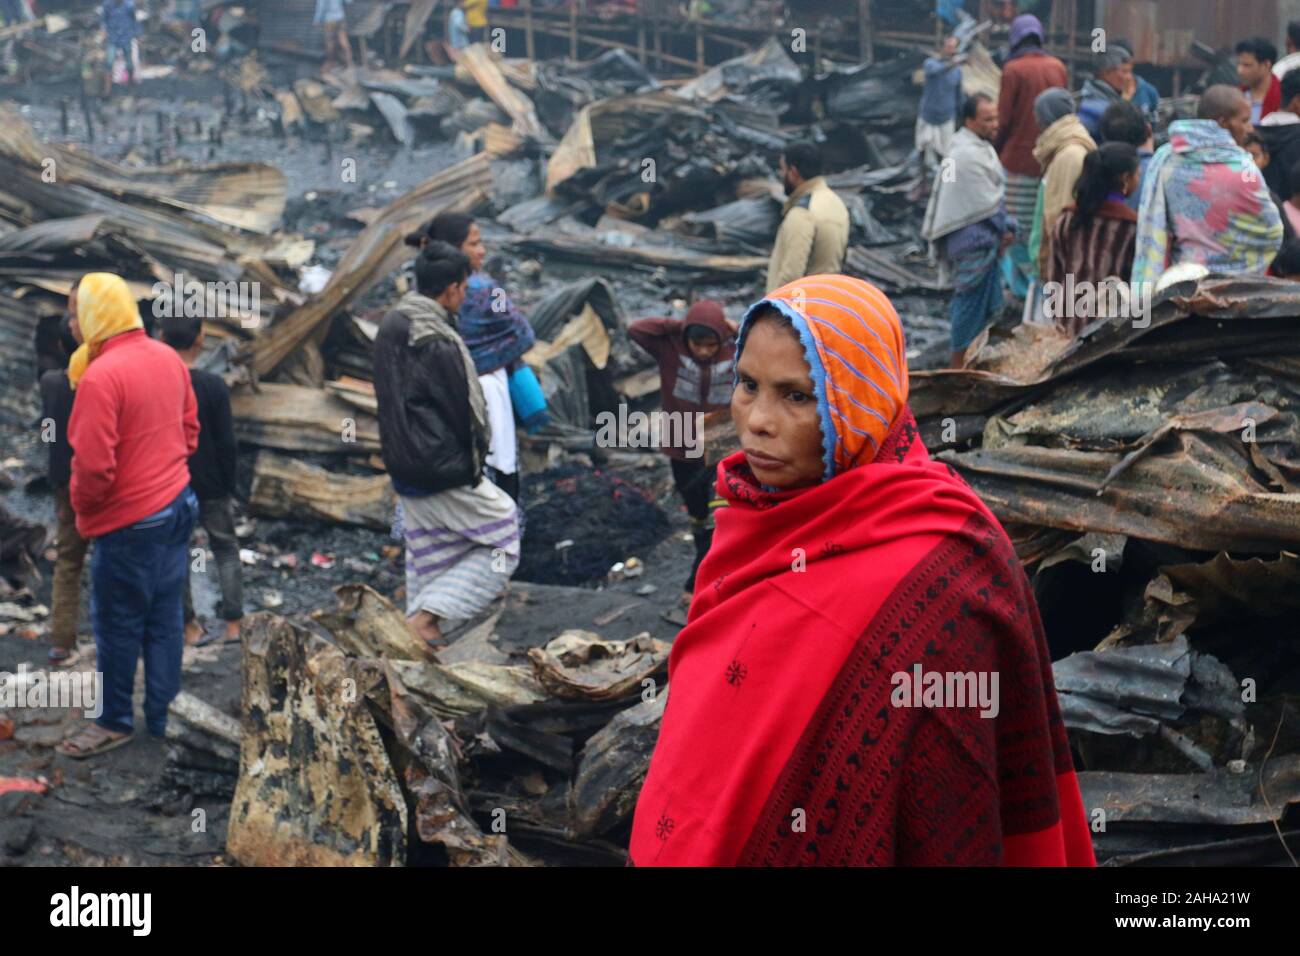 Dwellers at the fire devastated slum in Baunia badh area of Kalshi at Dhaka’s Mirpur.A fire gutted over 100 shanties at a slum in Baunia badh area of Kalshi at Dhaka’s Mirpur. Stock Photo